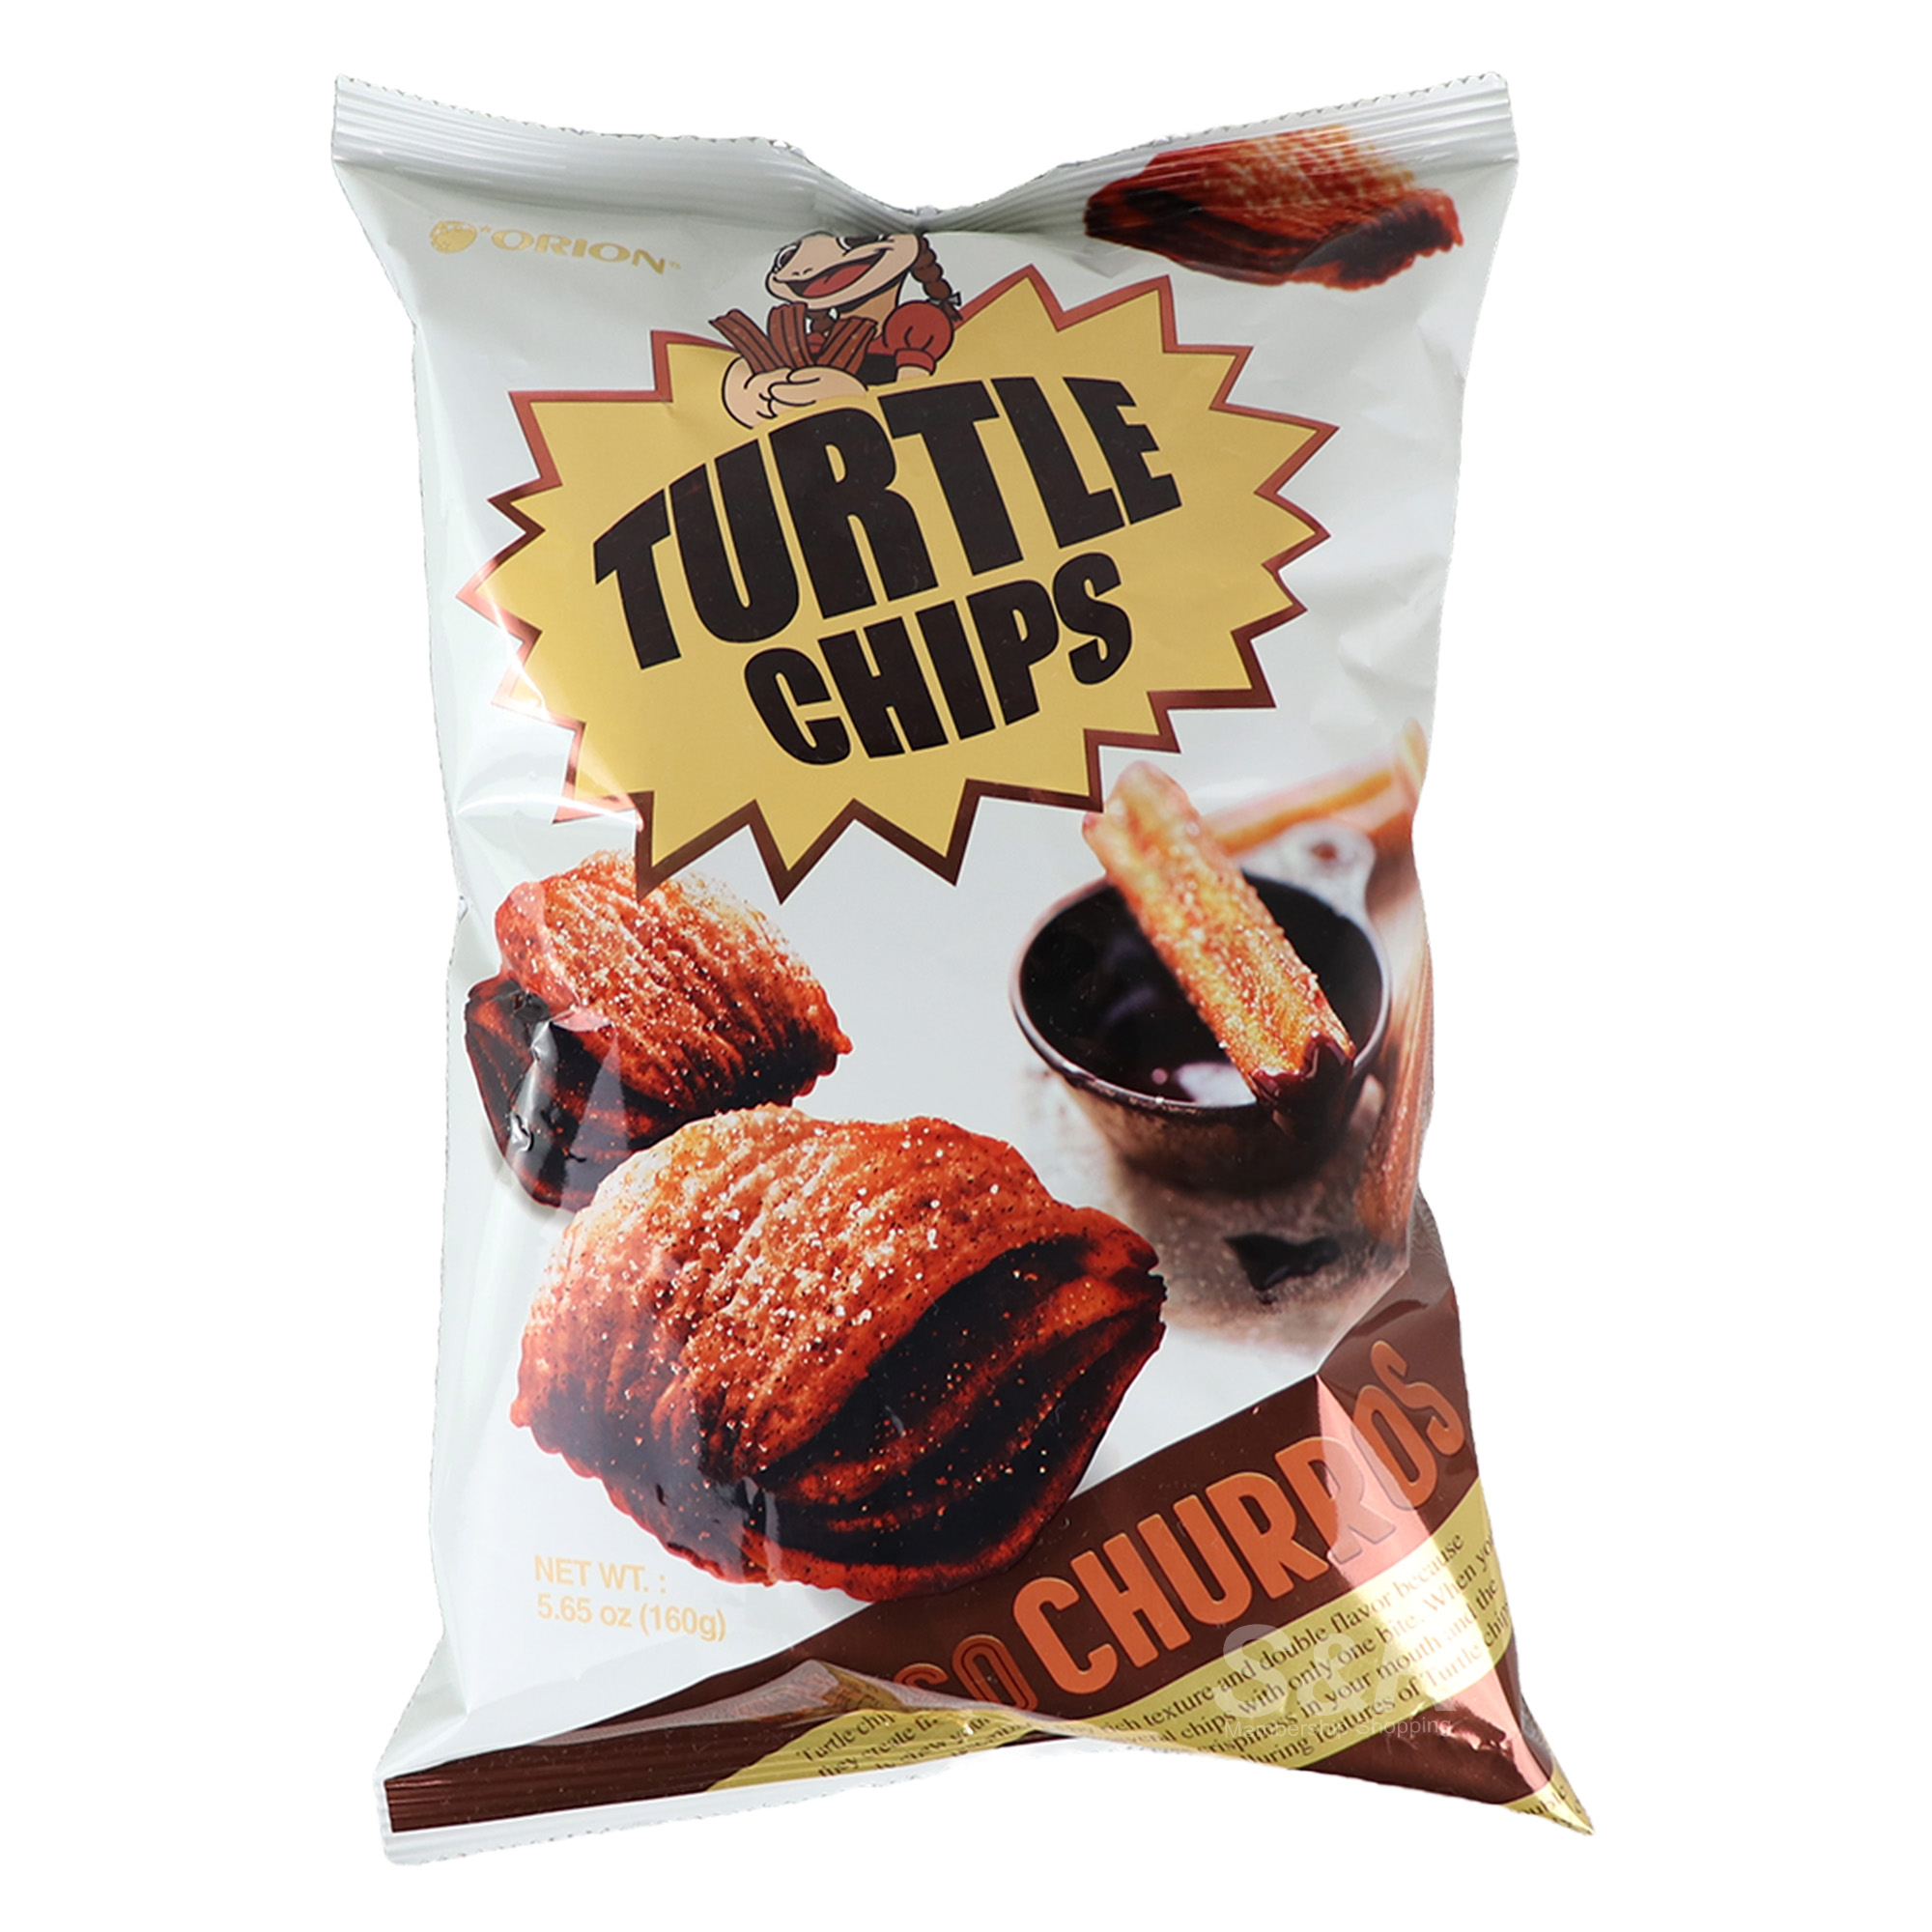 Orion Turtle Chips Truffle Choco Churros Flavor 160g